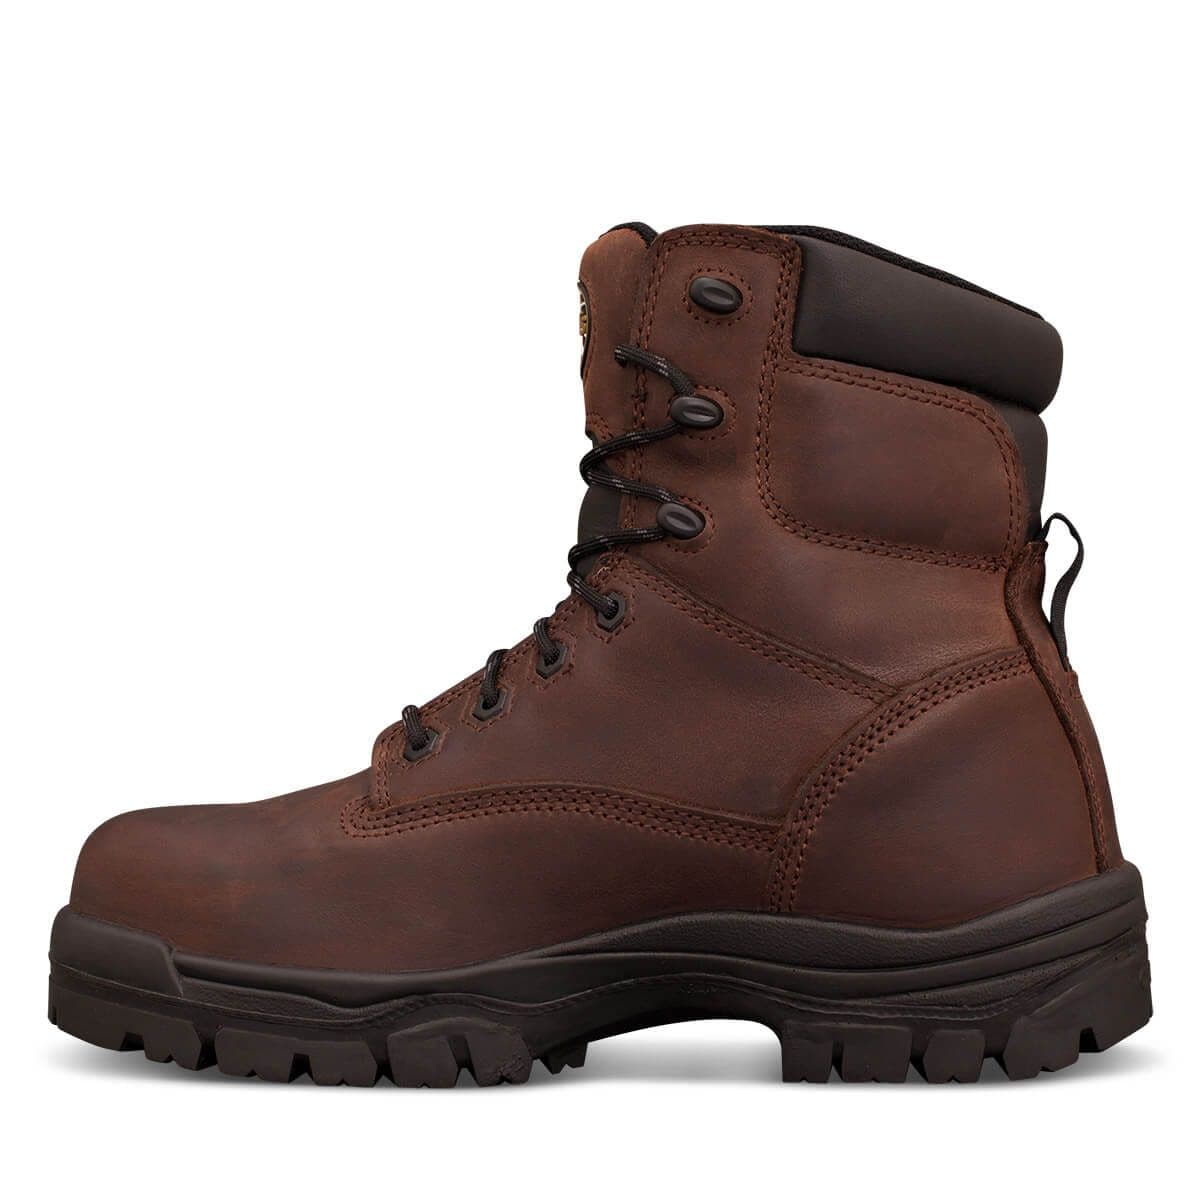 Oliver Mens 45-637 150mm lu at Boots Comp tpu Brown 8